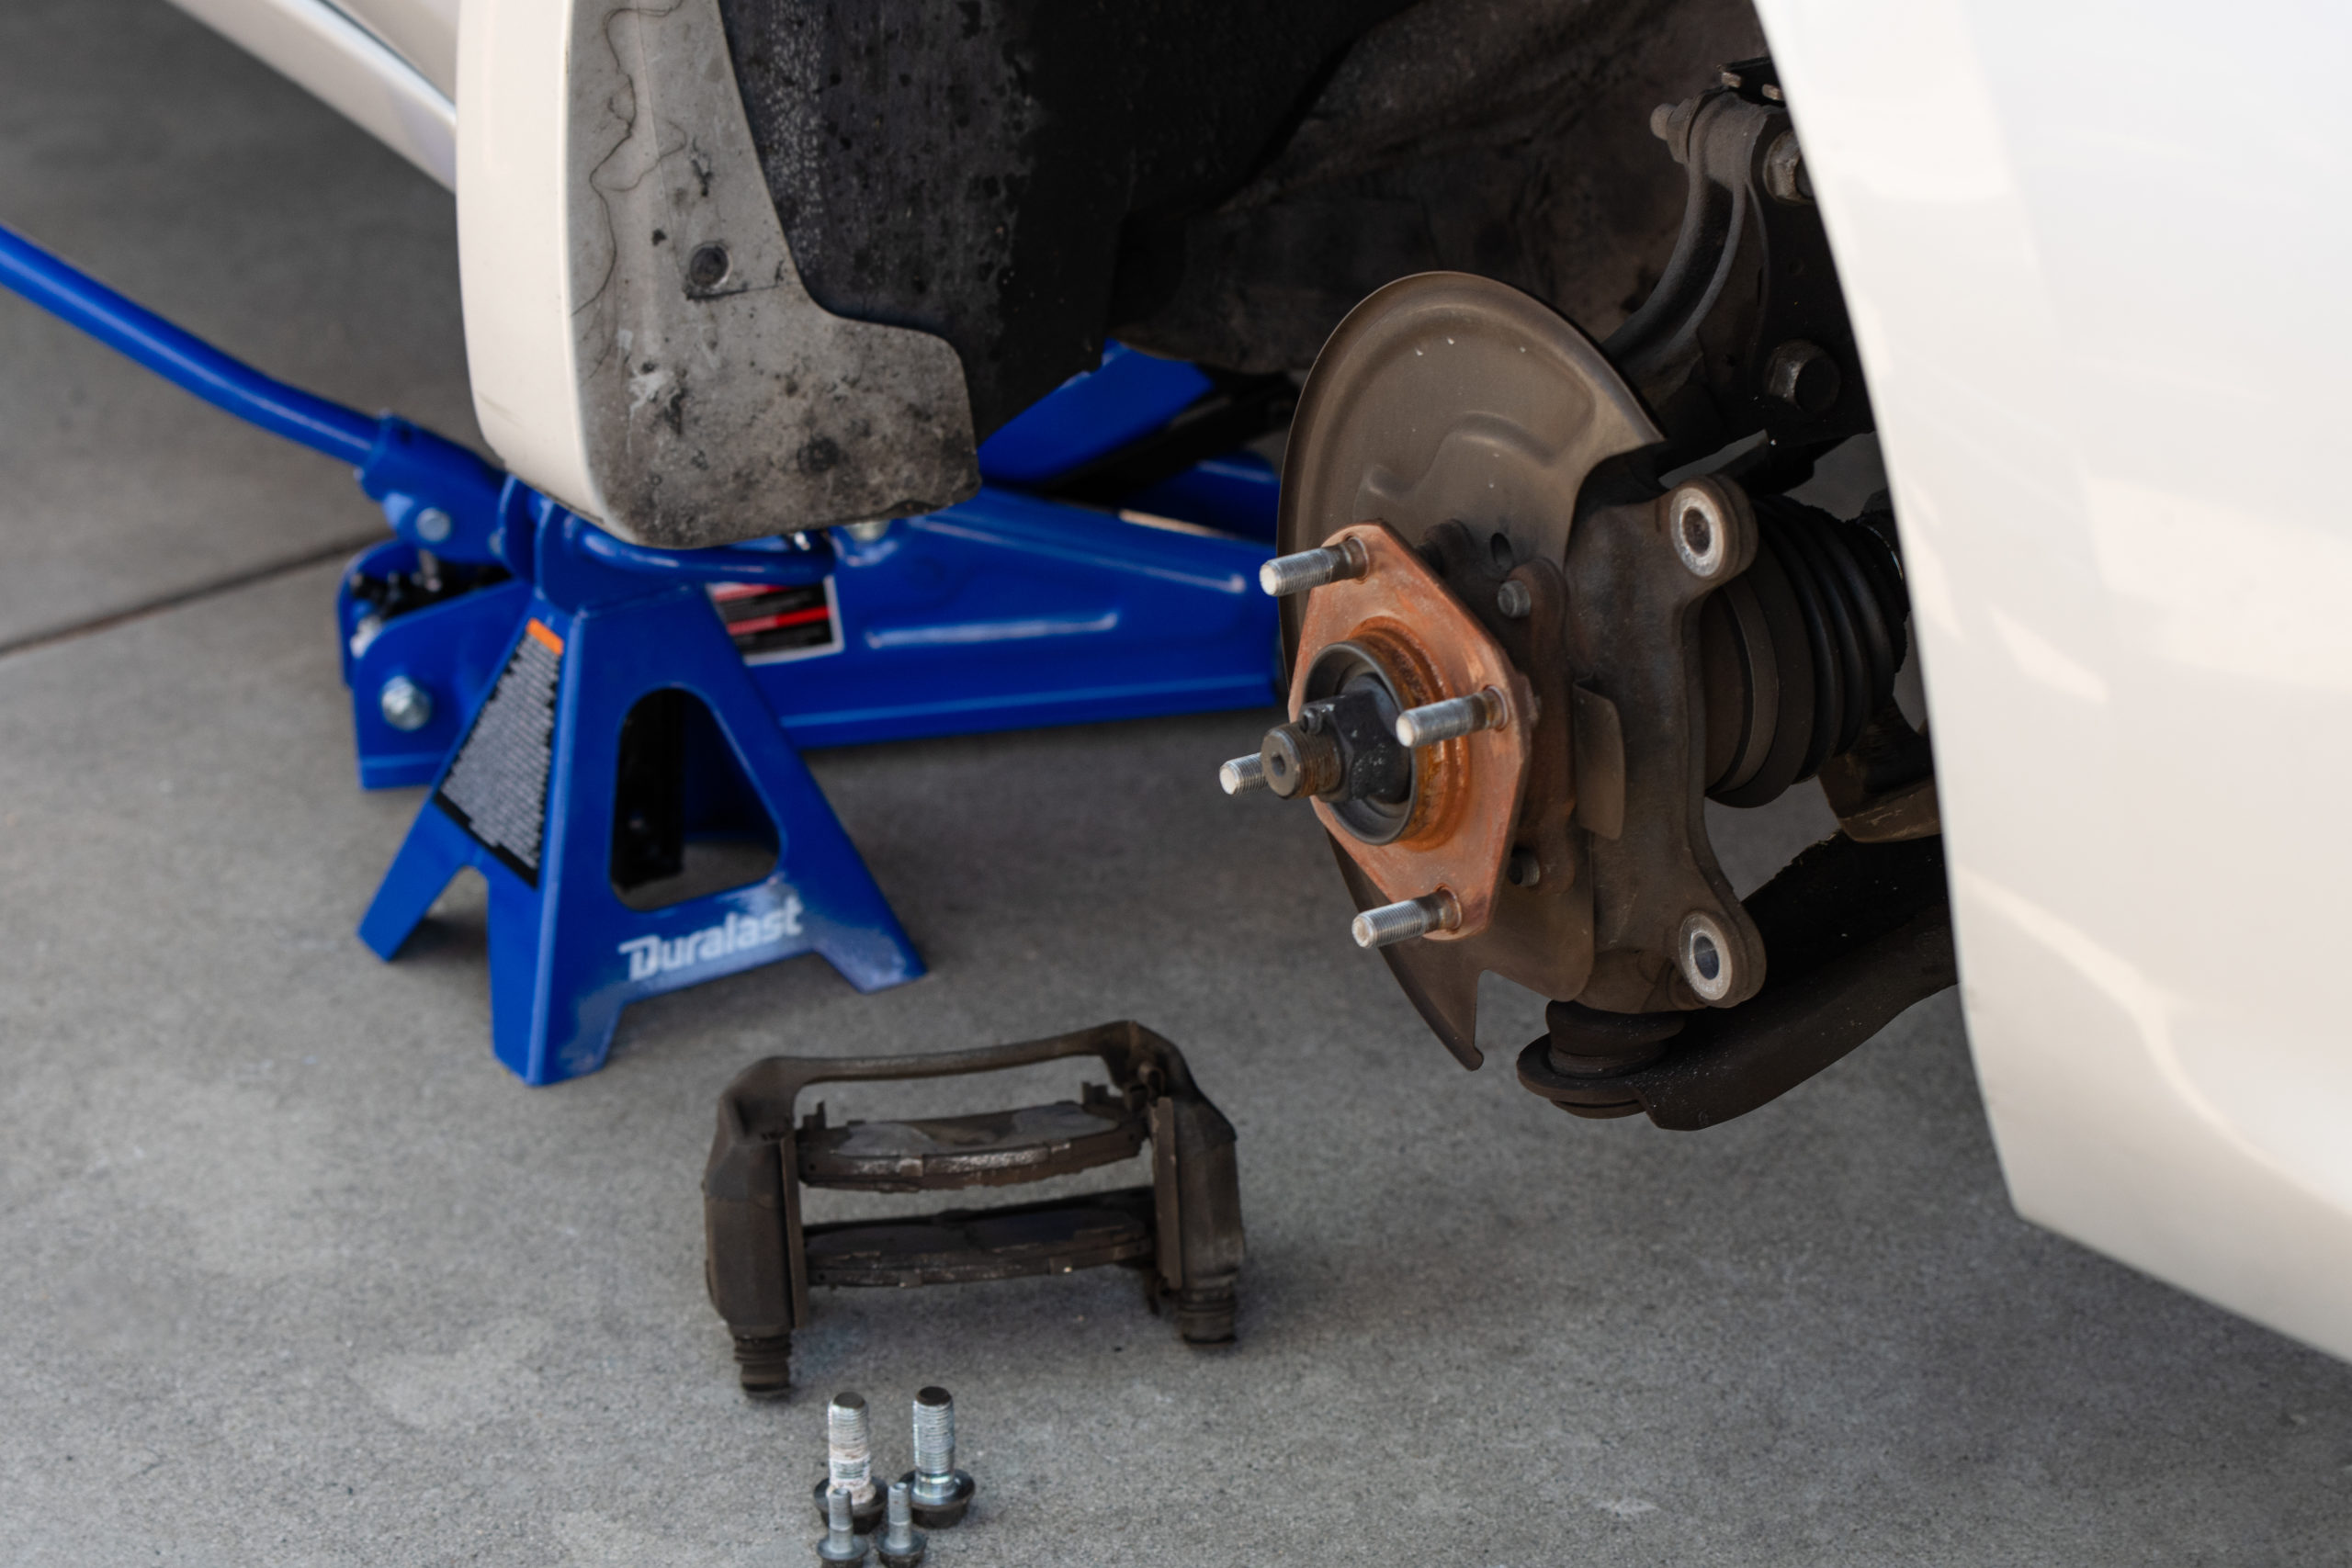 Don't Let Worn Brake Pads Catch You by Surprise: Learn How to